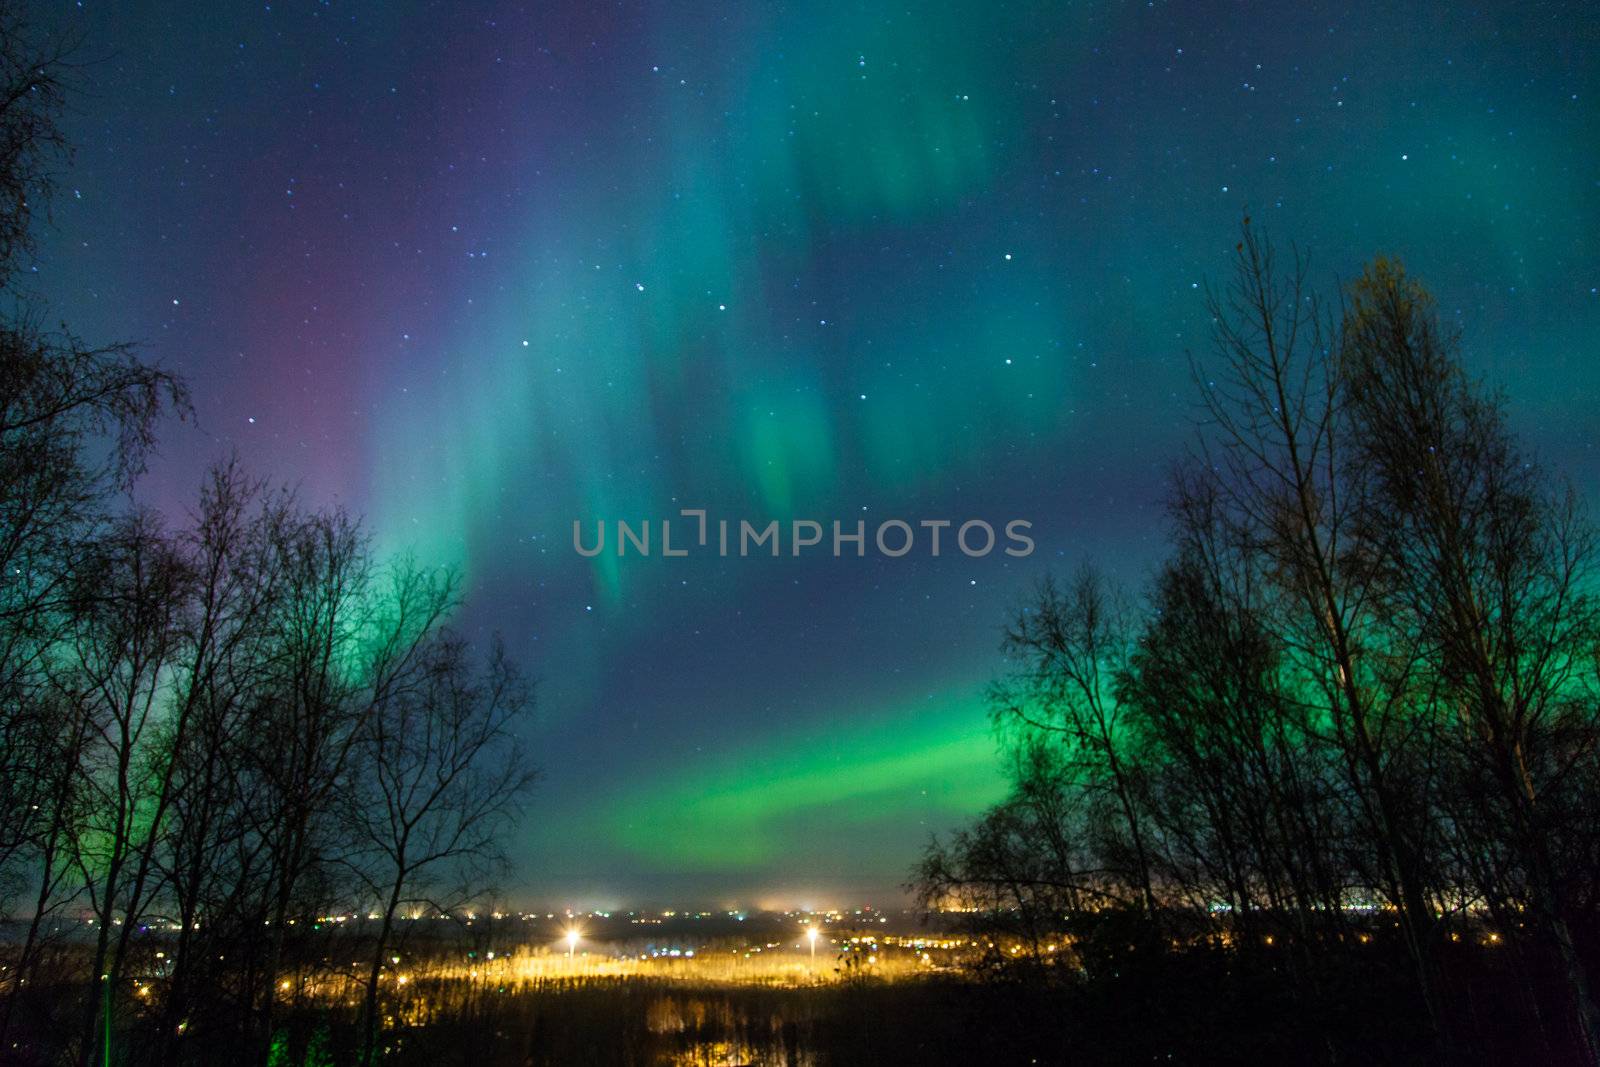 Northern lights and Big Dipper shine brightly over a city